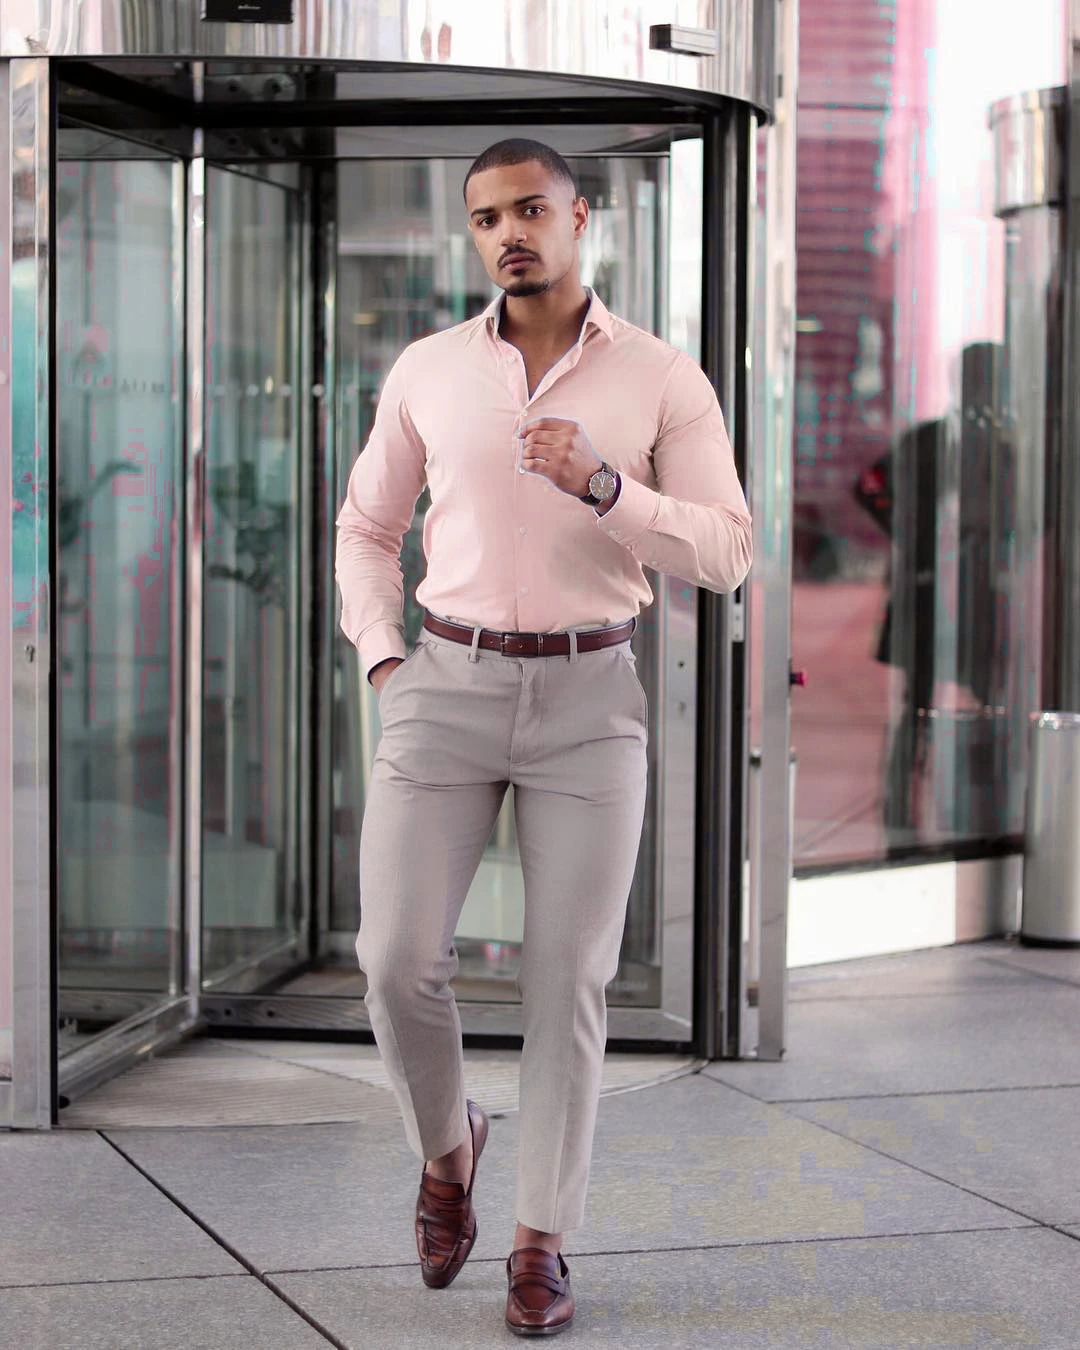 Peach color shirt with light grey pants